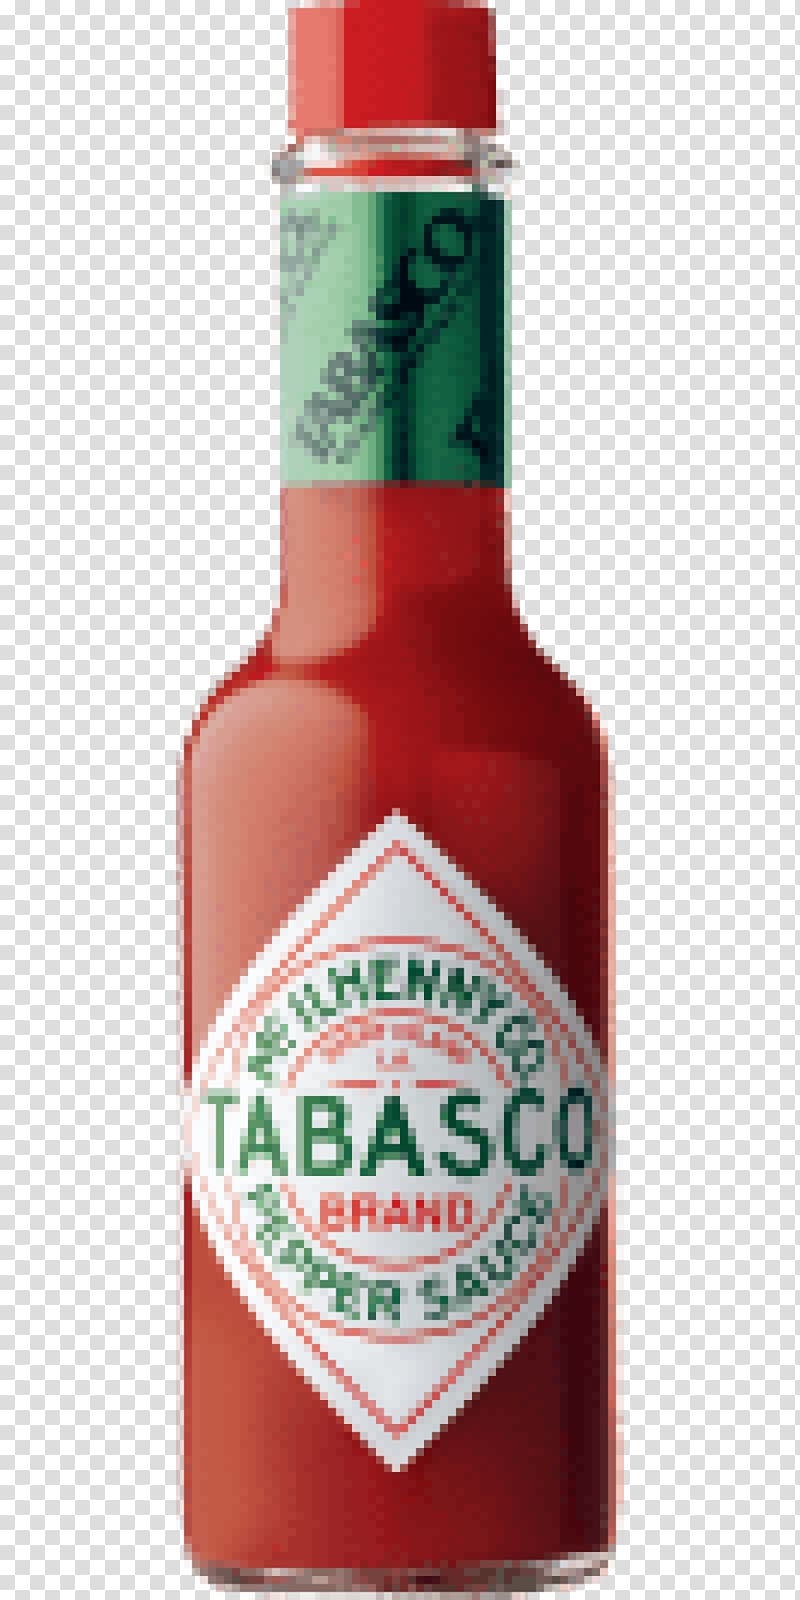 Tabasco pepper Hot Sauce Chili pepper, Hot Sauce Day transparent background PNG clipart